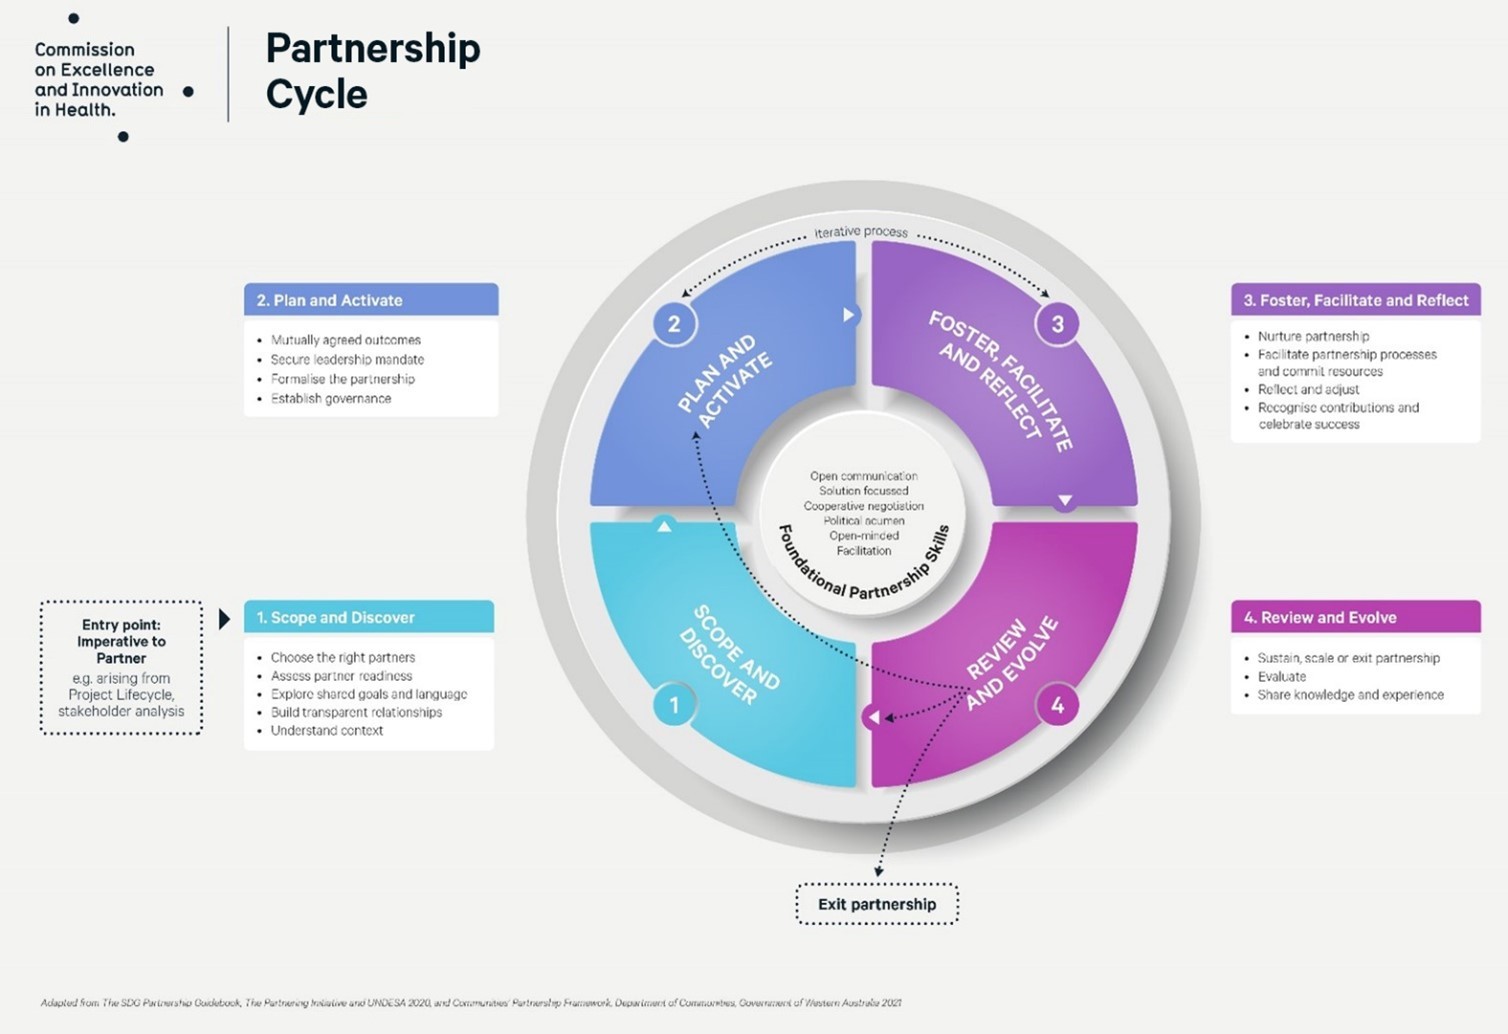 Image of The CEIH Partnership Cycle, including the four stages of Scope and Discover, Plan and Activiate, Foster, Facilitate and Reflect, Review and Evolve